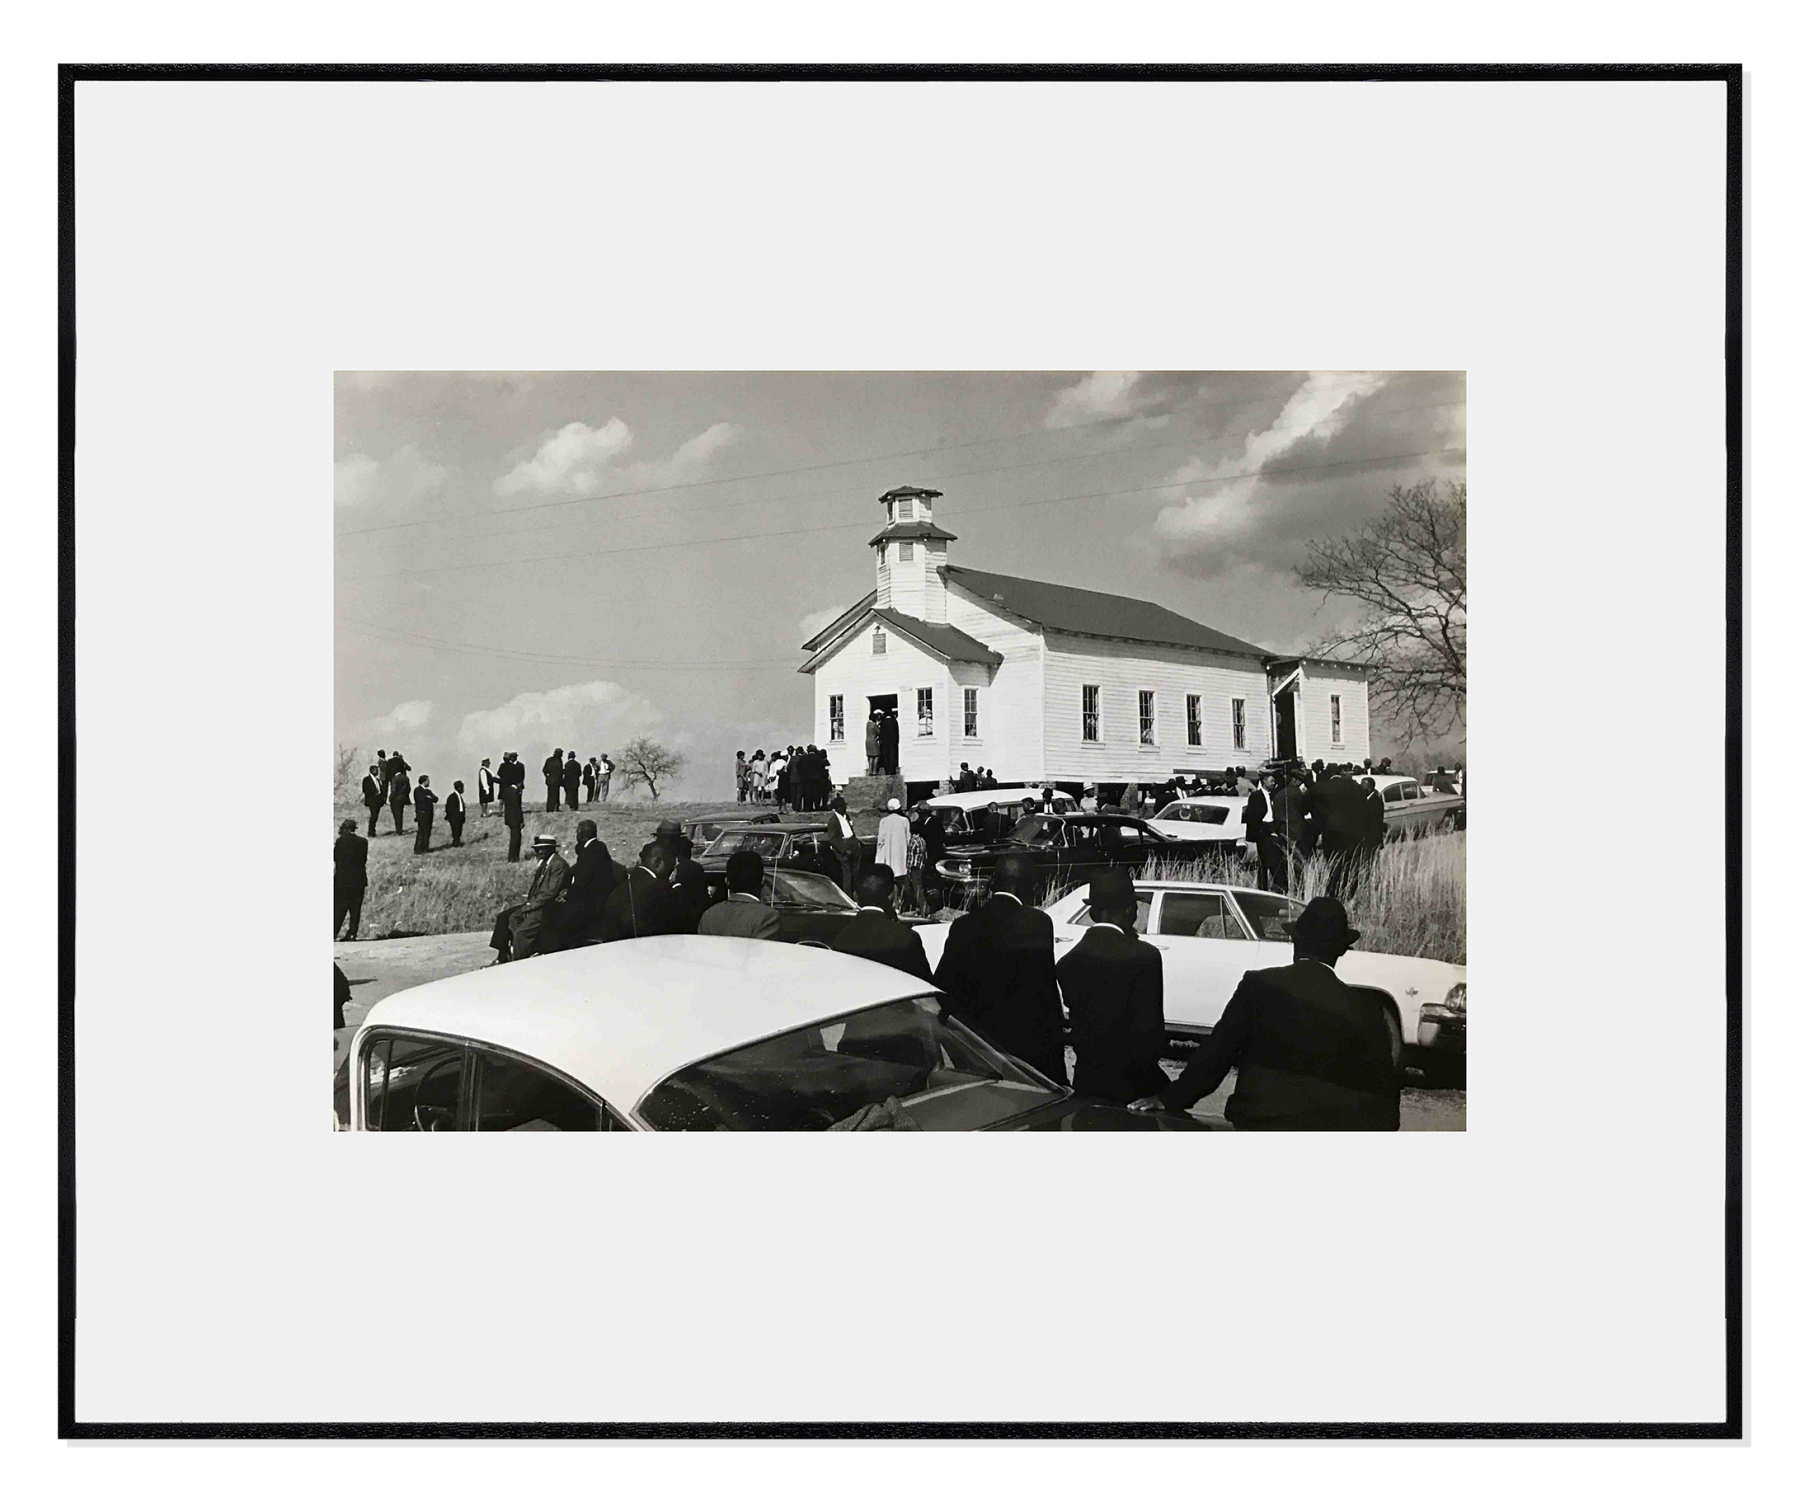 A Funeral Service in a Baptist Church at Lowdes County, Alabama (from Deep South/New York City Life), circa 1973
Vintage silver gelatin print

Image: 20.3 x 30.5 cm / 8 x 12 in.